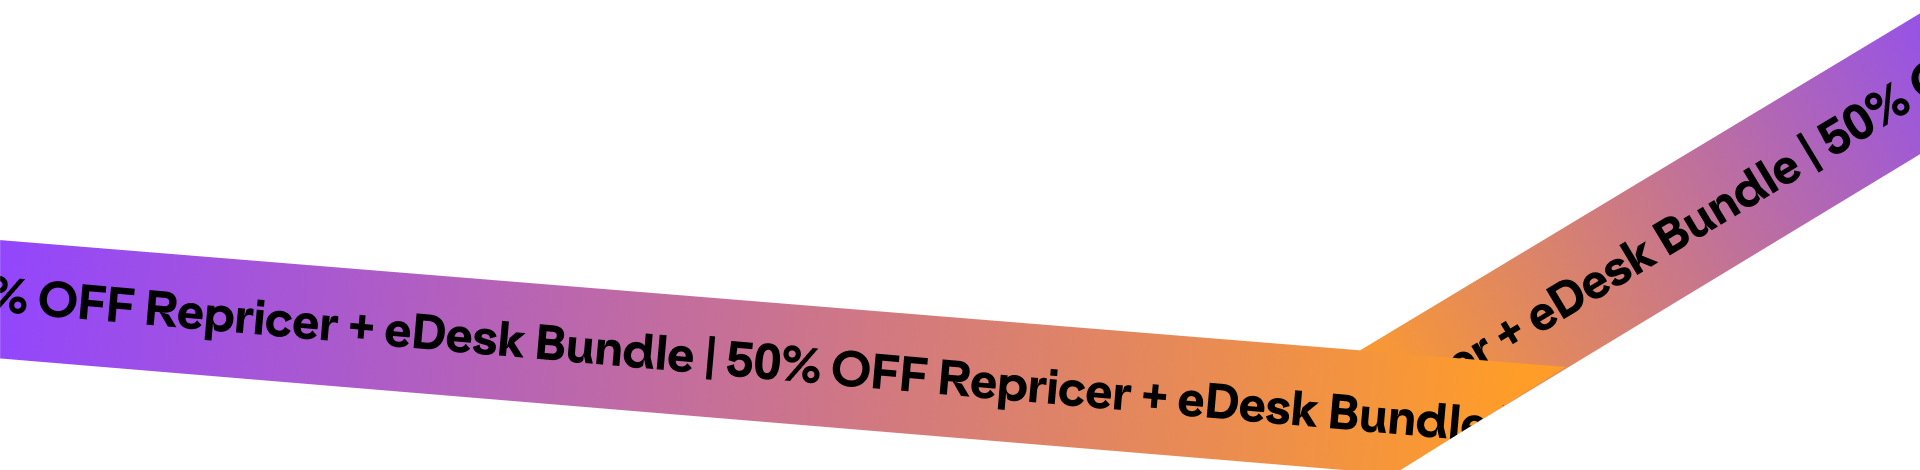 edesk and repricer banner